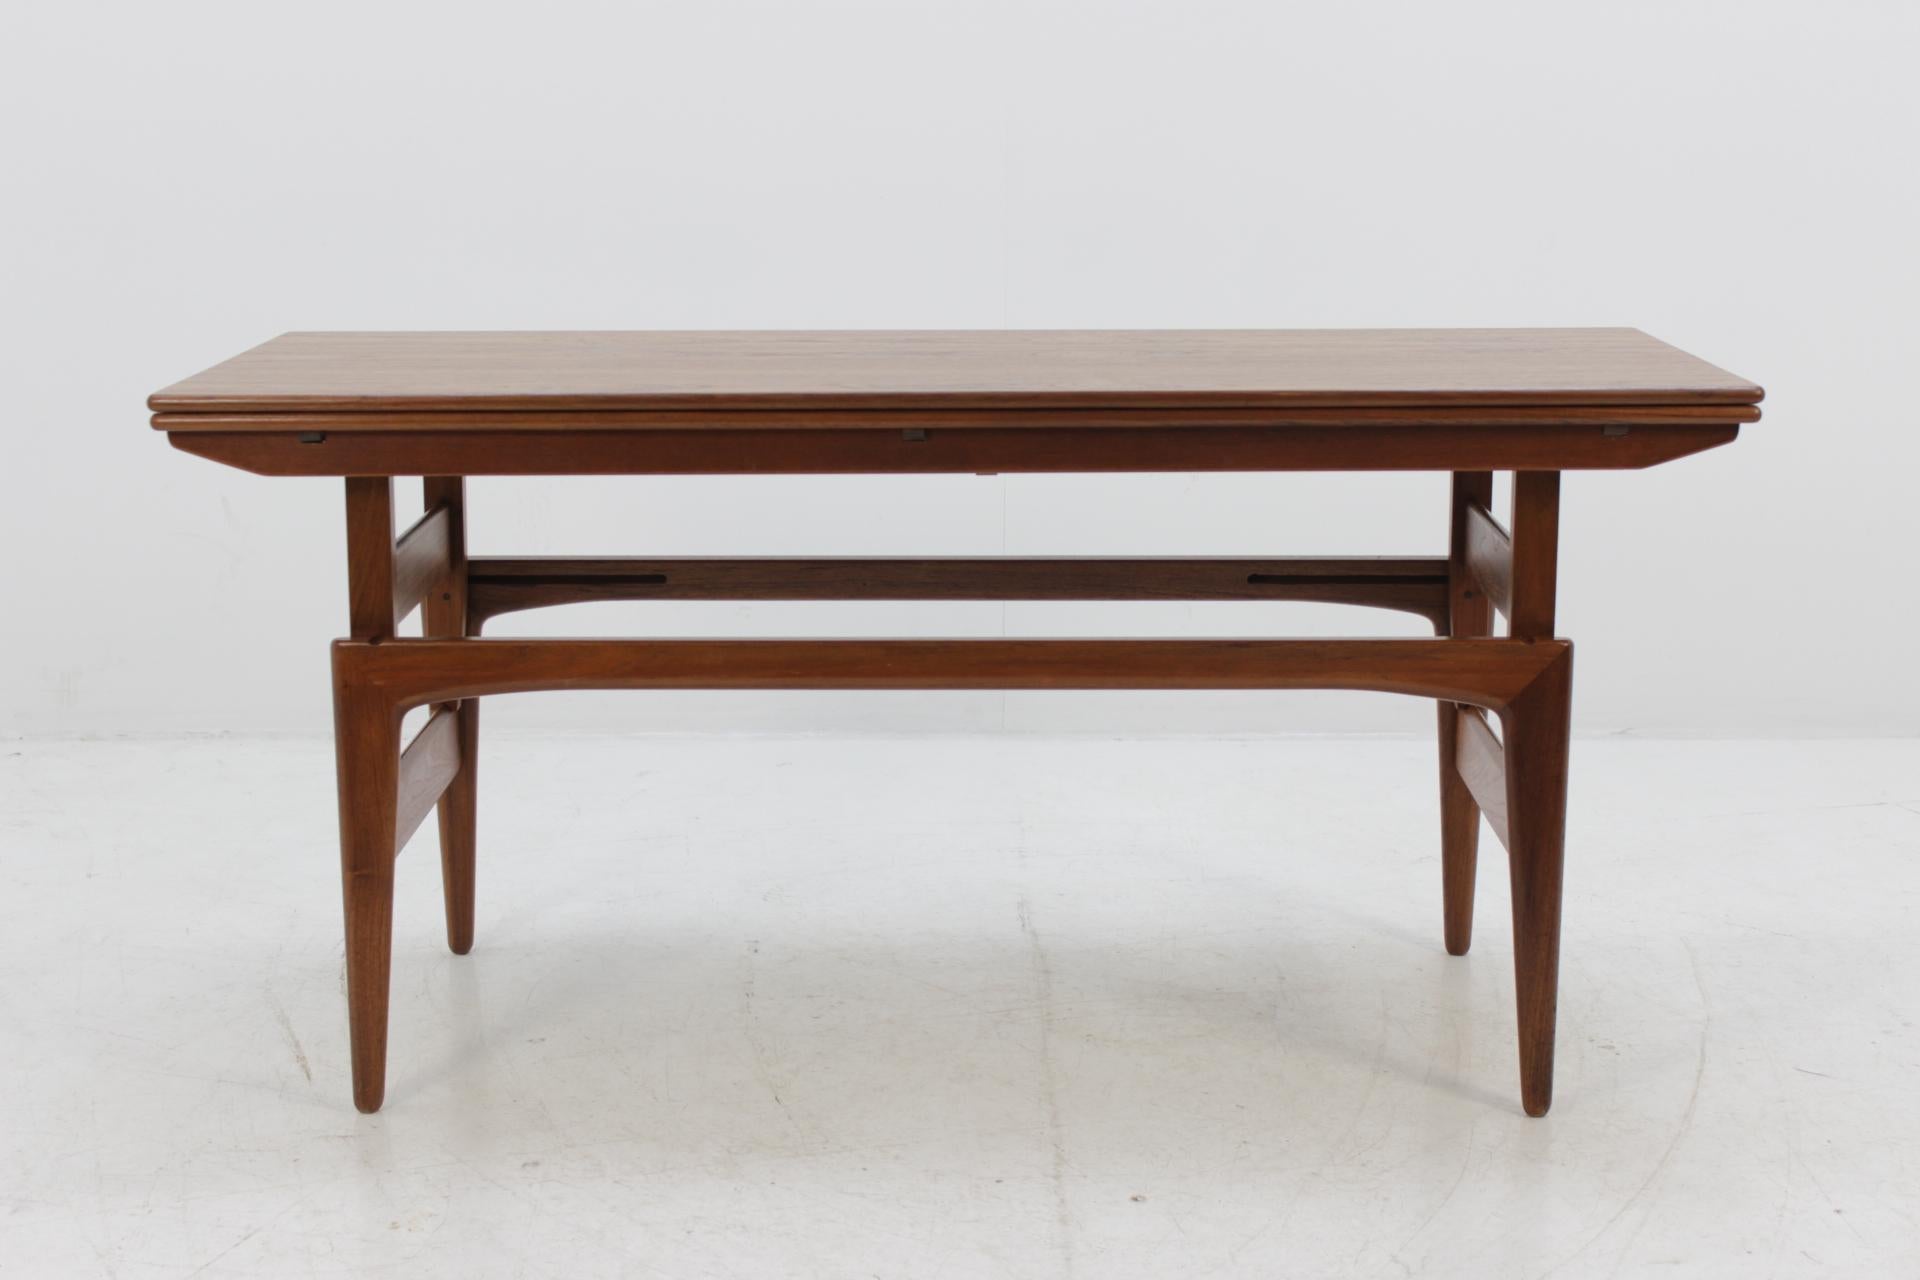 This space saving piece can be raised and also used as a small dining table. Can be raised to 75 cm and expand to 90 cm. This item was carefully restored.